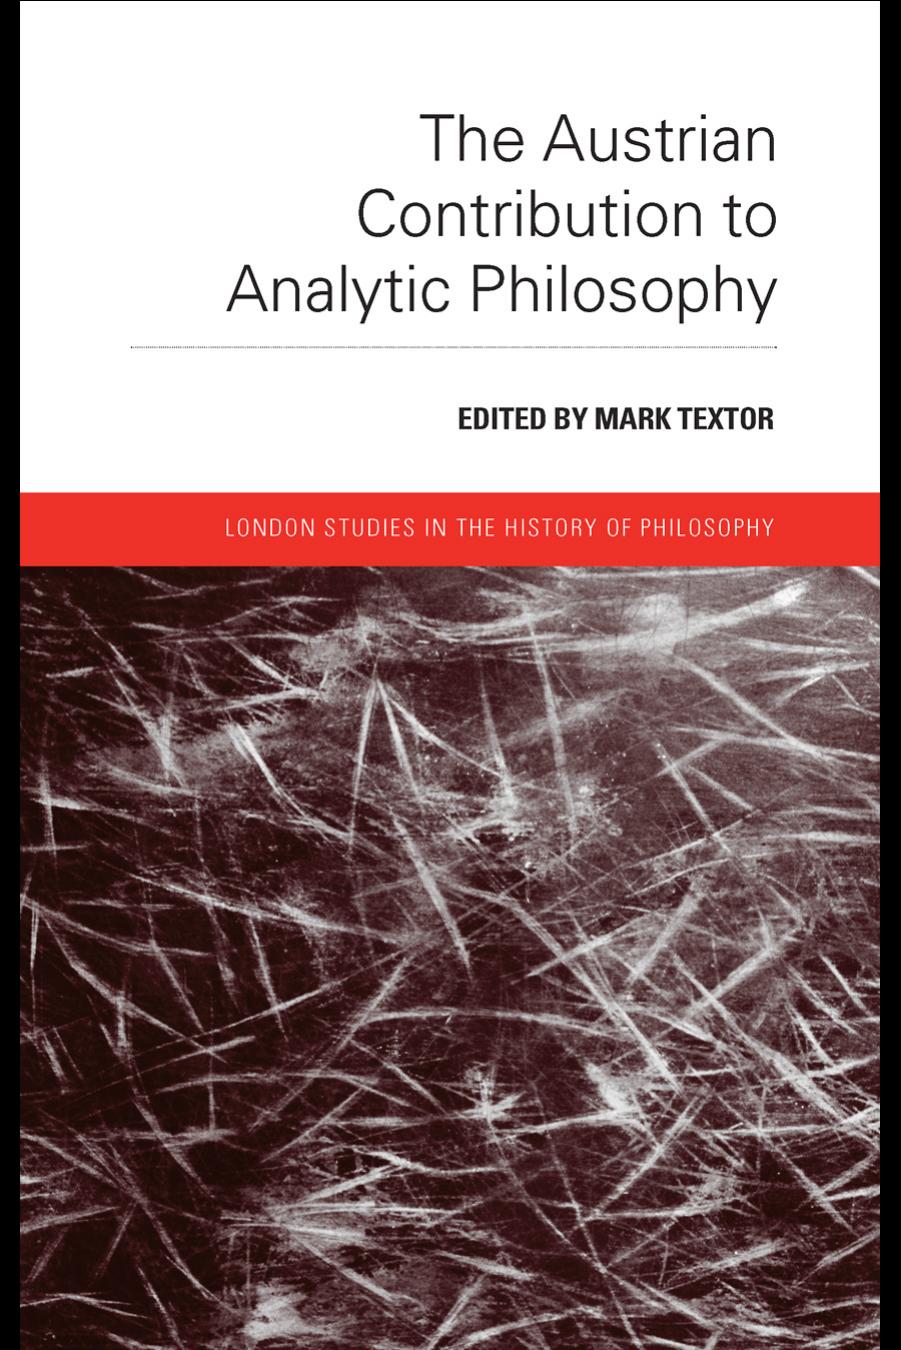 The Austrian Contribution to Analytic Philosophy